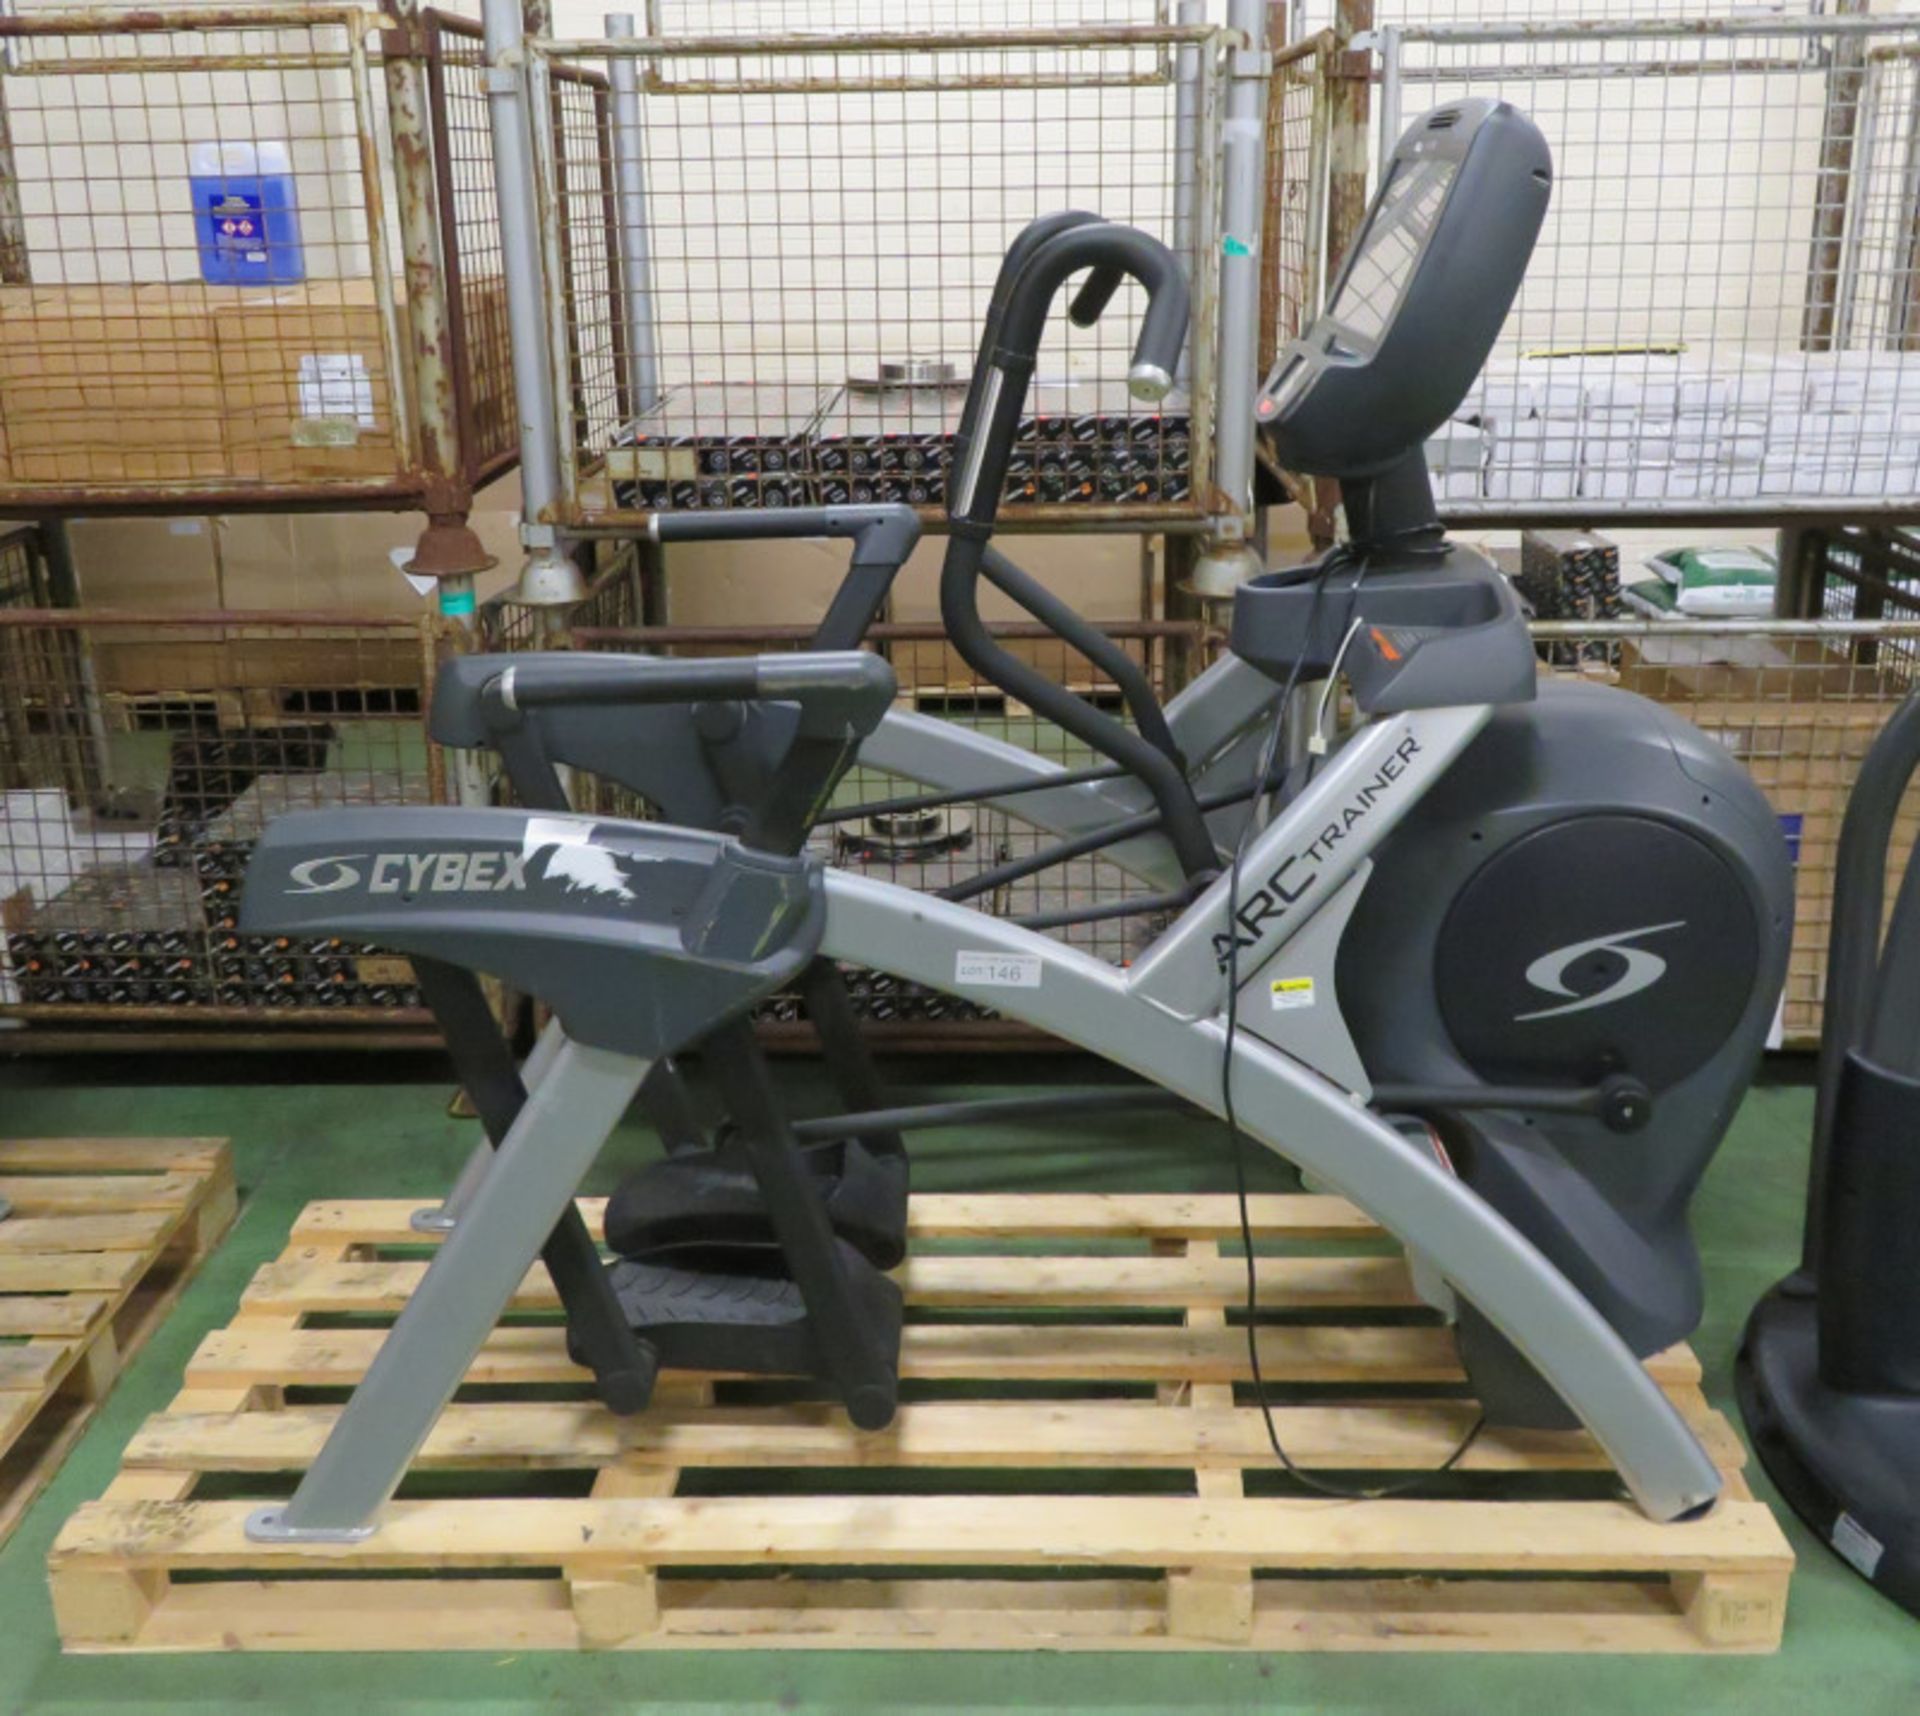 Cybex Arc Trainer cross trainer - model 772AT